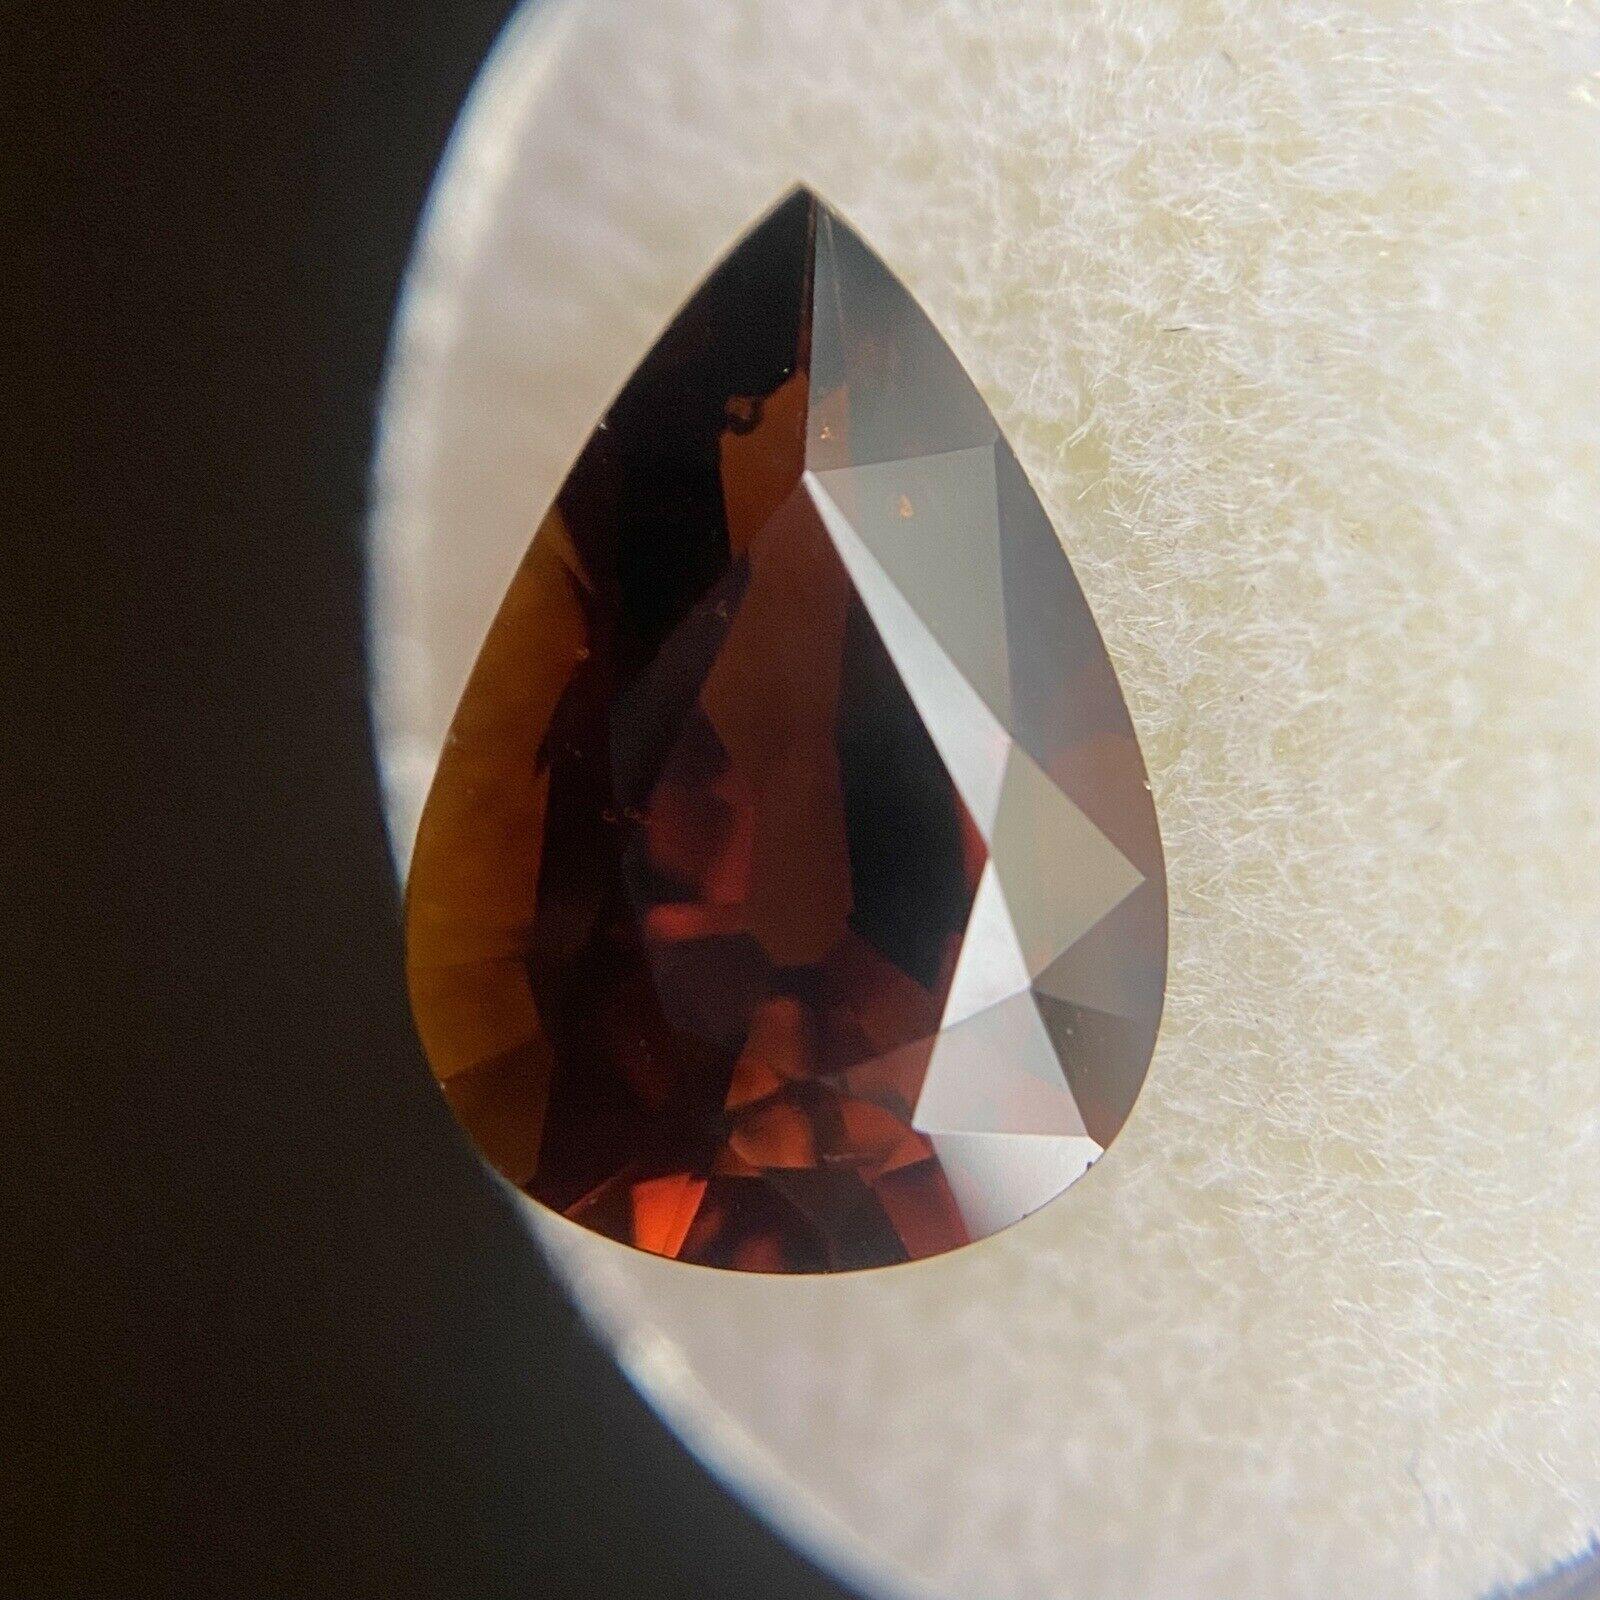 Fine 5.51ct Deep Orange Tourmaline Pear Teardrop Cut Loose Gemstone 15 x 10.5mm

Fine Deep Orange Tourmaline Gemstone. 
5.51 Carat stone with a beautiful deep reddish orange colour and very good clarity. Some small natural inclusions visible when